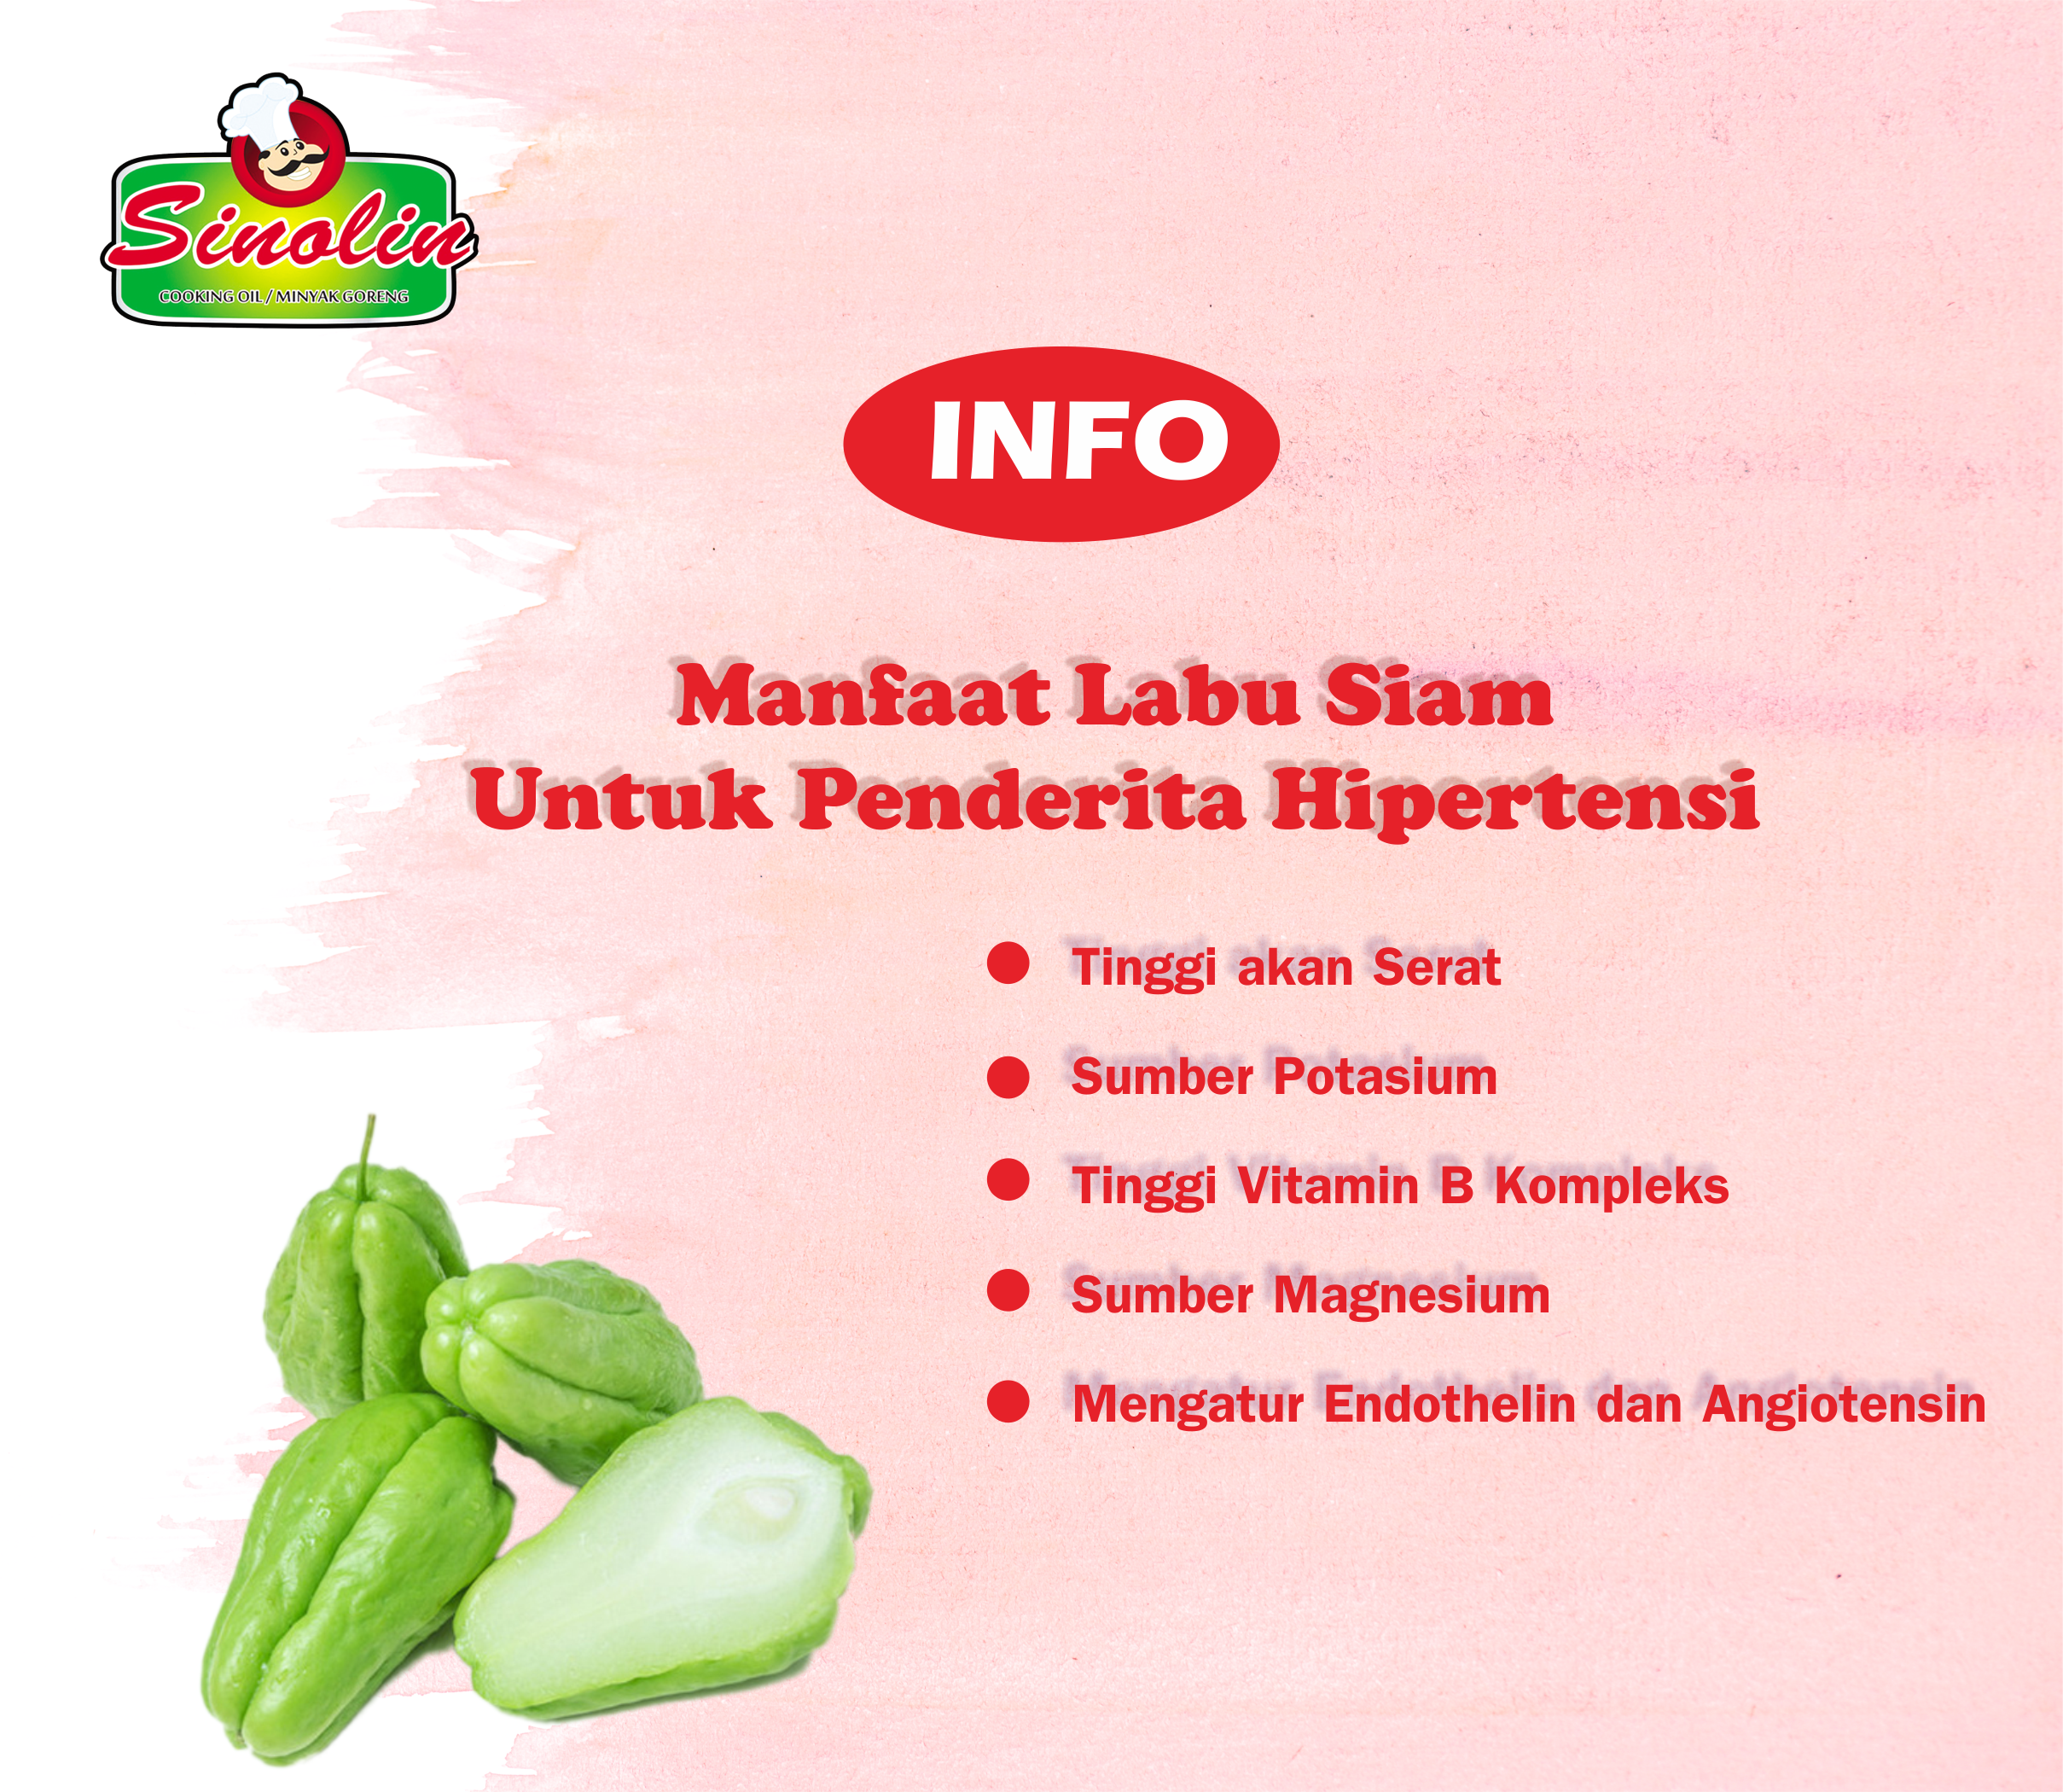 Info: Benefits of Chayote for Hypertension Patients By Dapur Sinolin